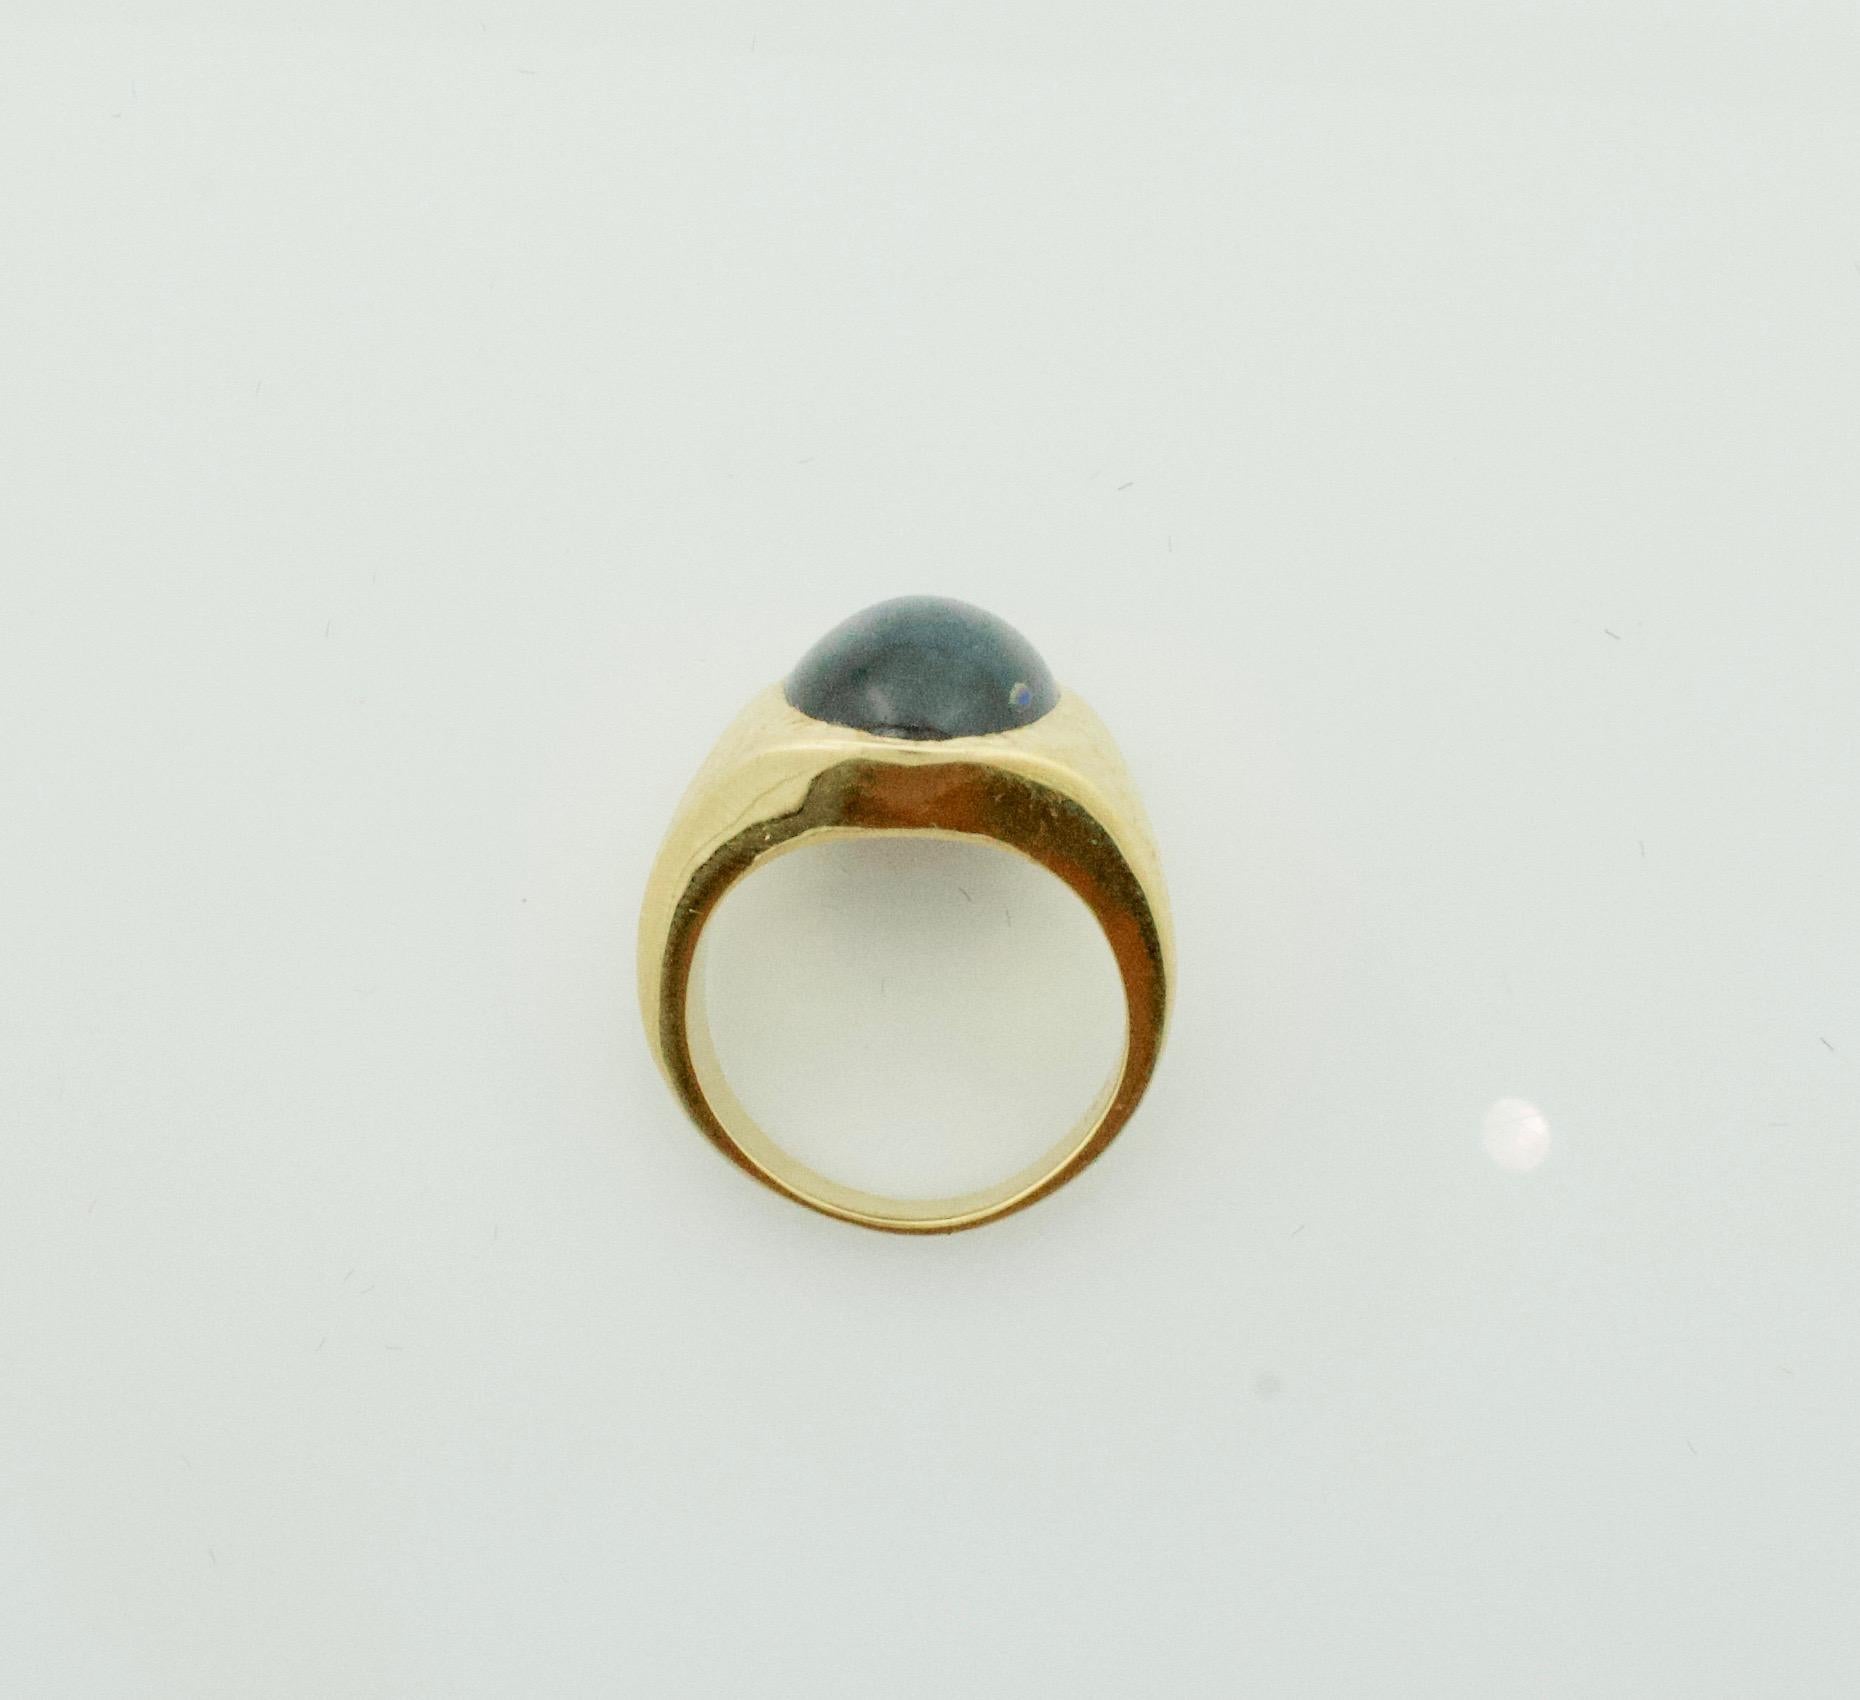 Cabochon Sapphire Pinky Ring with Bark Finish in Yellow Gold In Excellent Condition For Sale In Wailea, HI